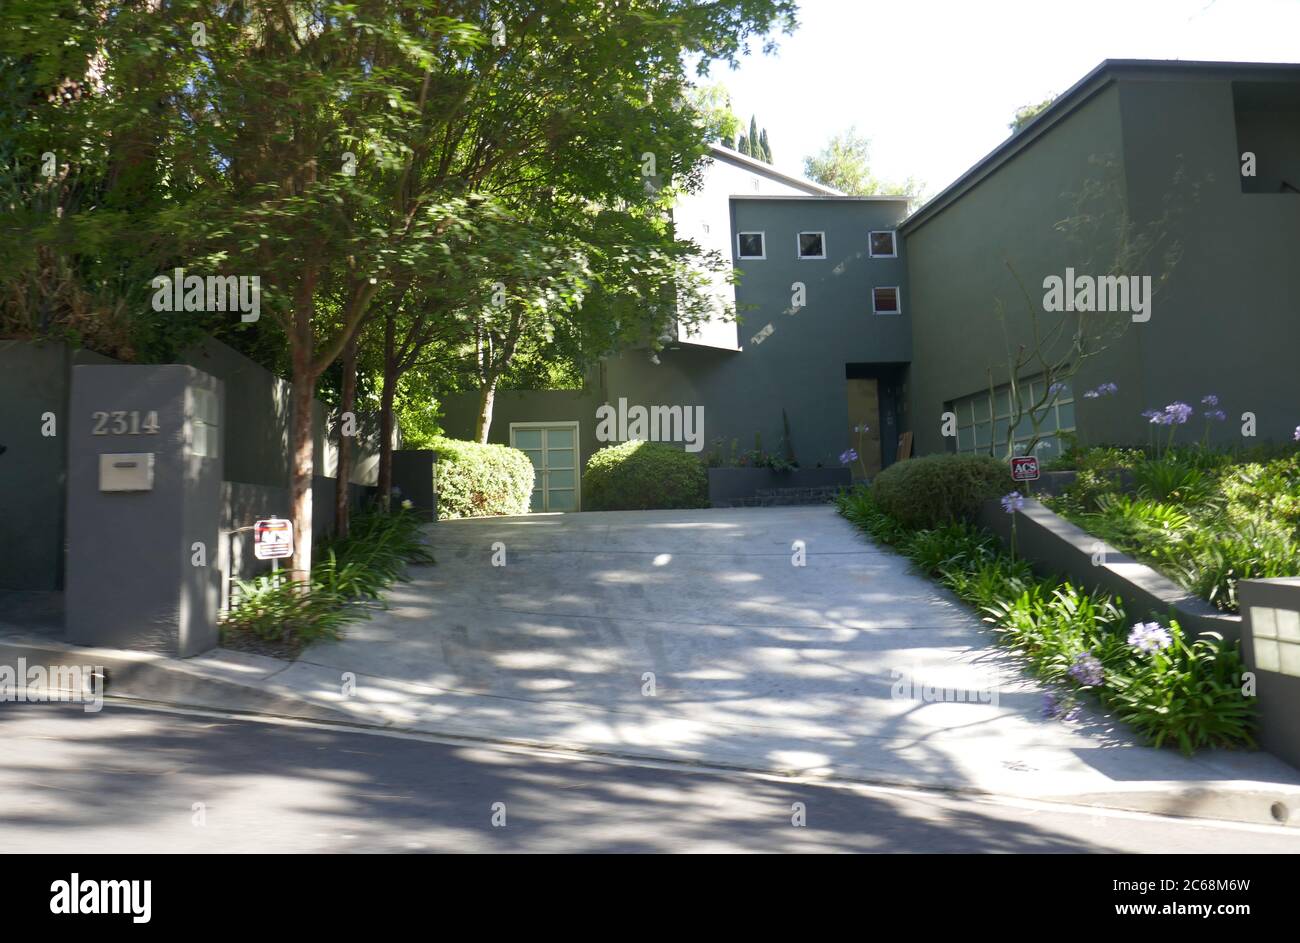 Beverly Hills, California, USA 7th July 2020 A general view of atmosphere of JFK's former mistress Judith Campbell's former home at 2314 San Ysidro Drive in Beverly Hills, California, USA. Photo by Barry King/Alamy Stock Photo Stock Photo